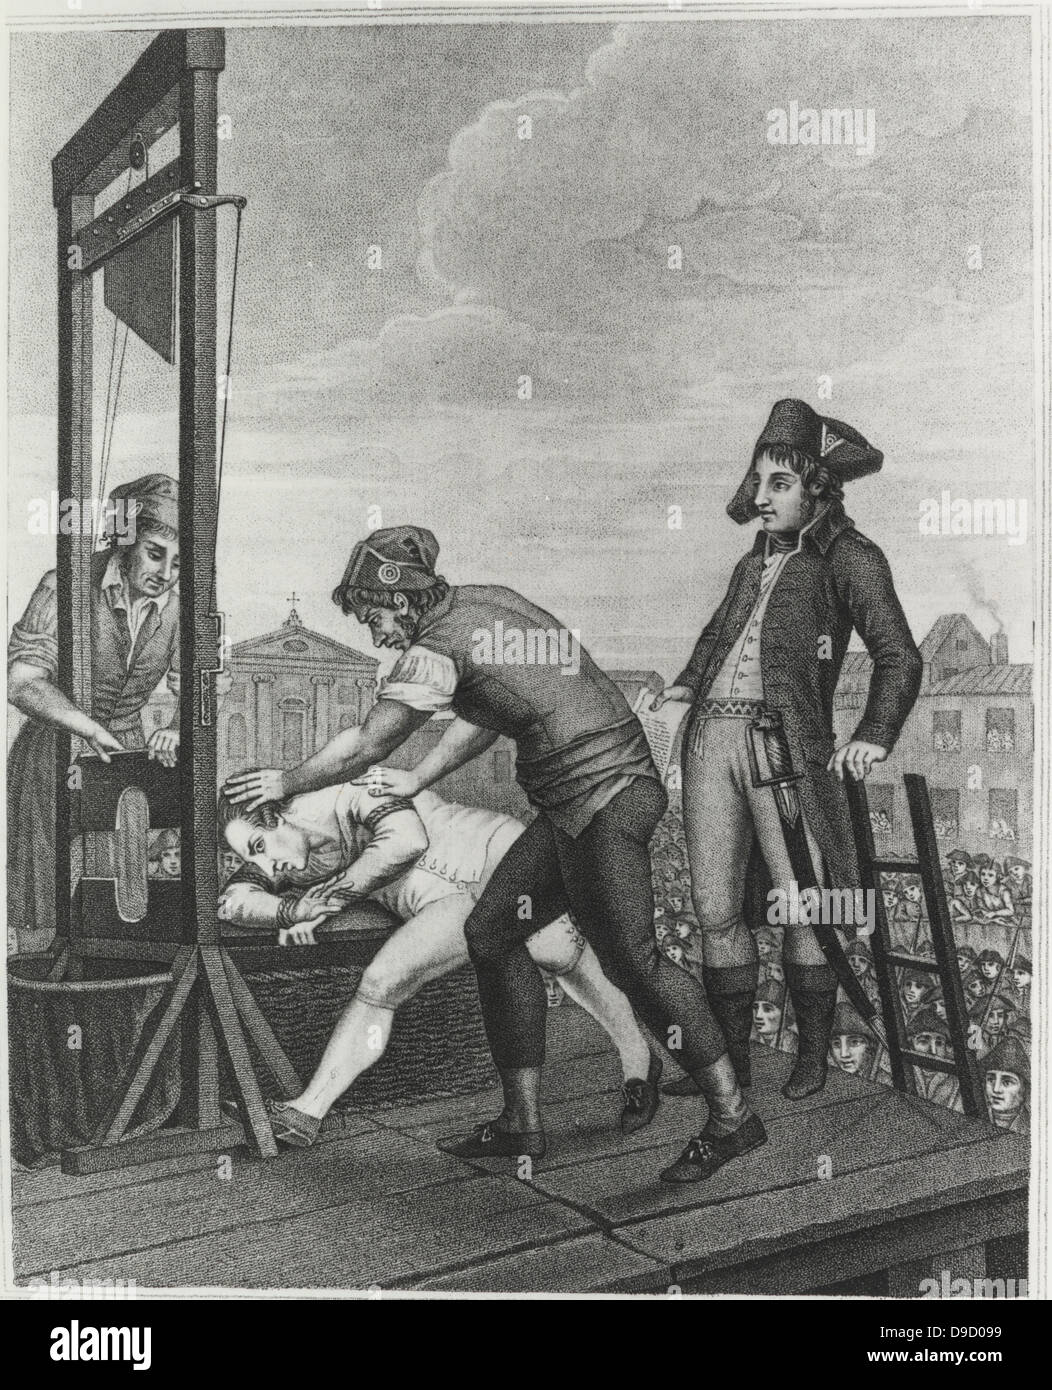 Maximilien de Robespierre (1758-1794) French lawyer, politician, and Revolutionary. Arrested 27 July 1794 and, with 21 of his closest associates, was executed by guillotine the next day. Stock Photo